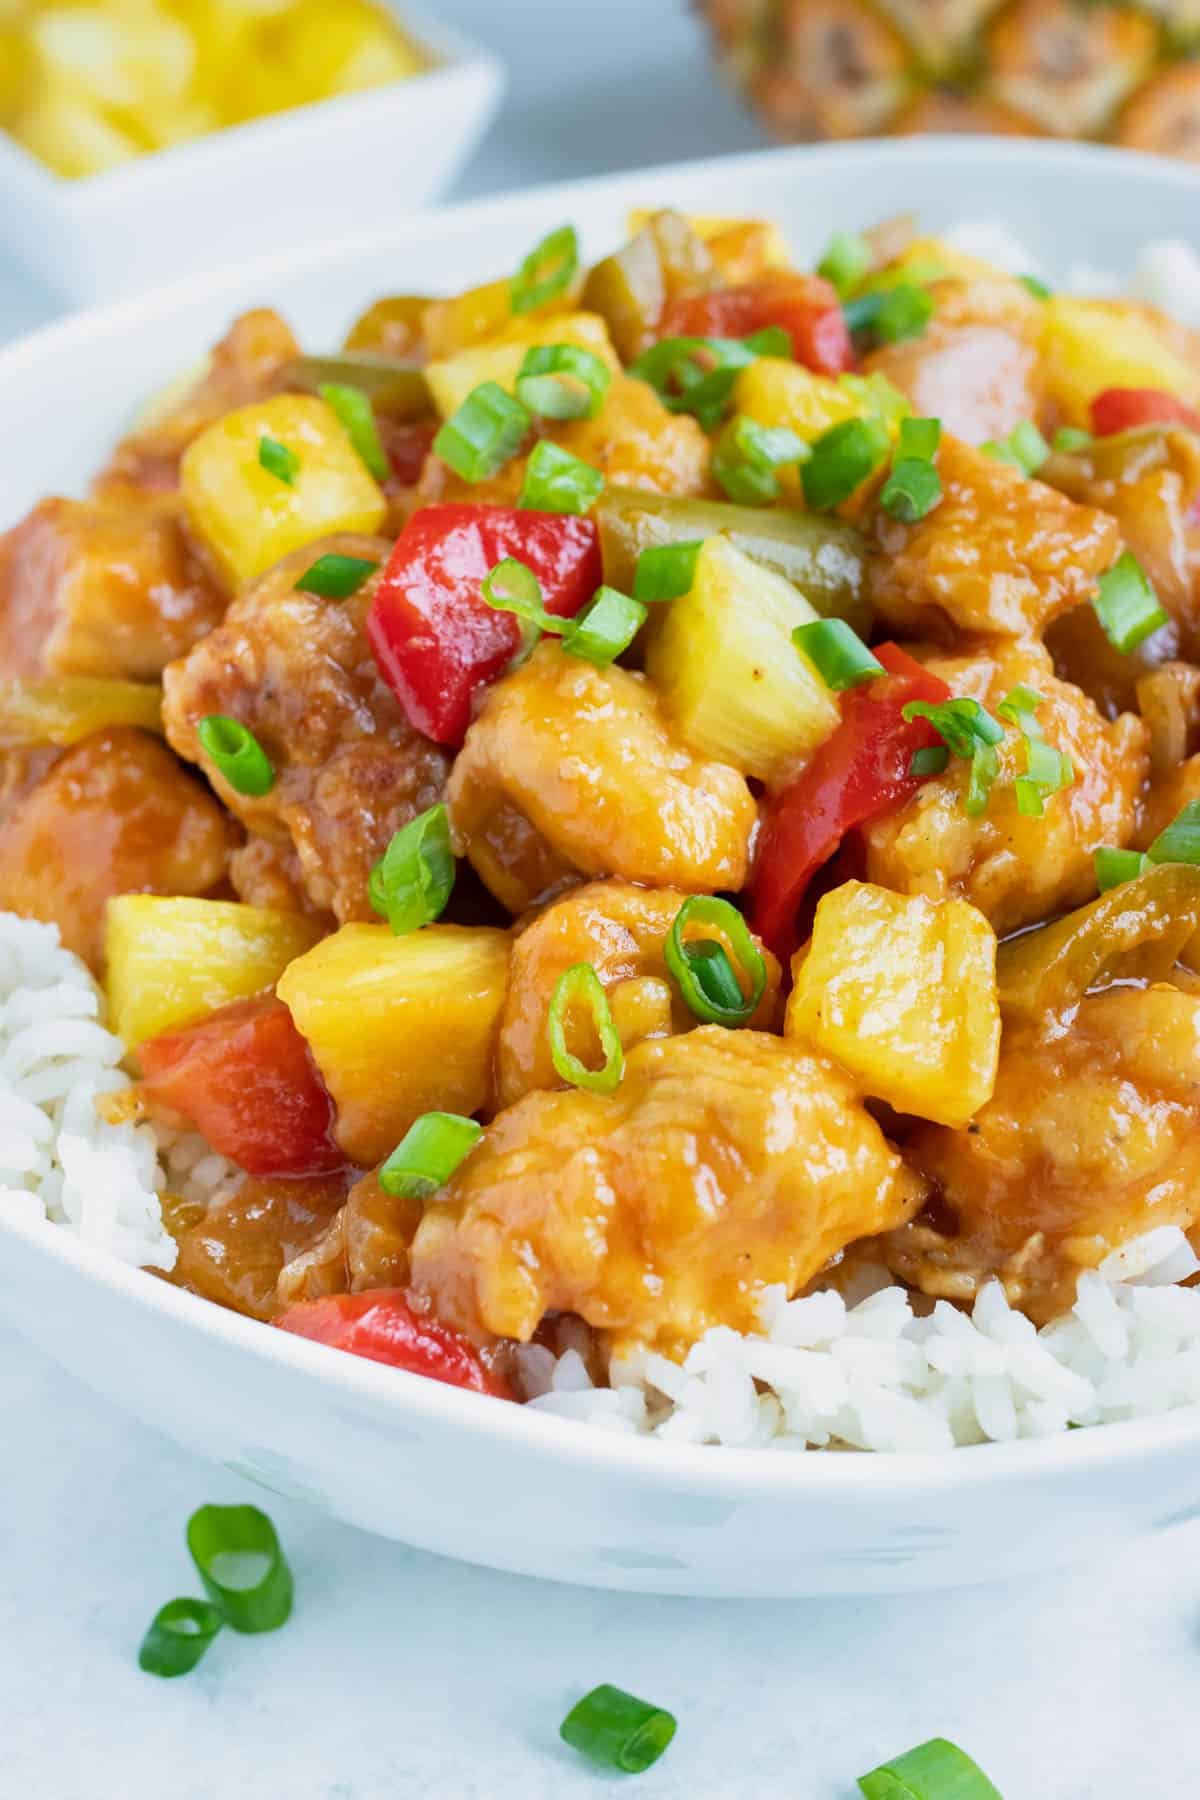 Pineapple Chicken is loaded with pineapple, bell peppers, and fresh green onions and laid over a rice.